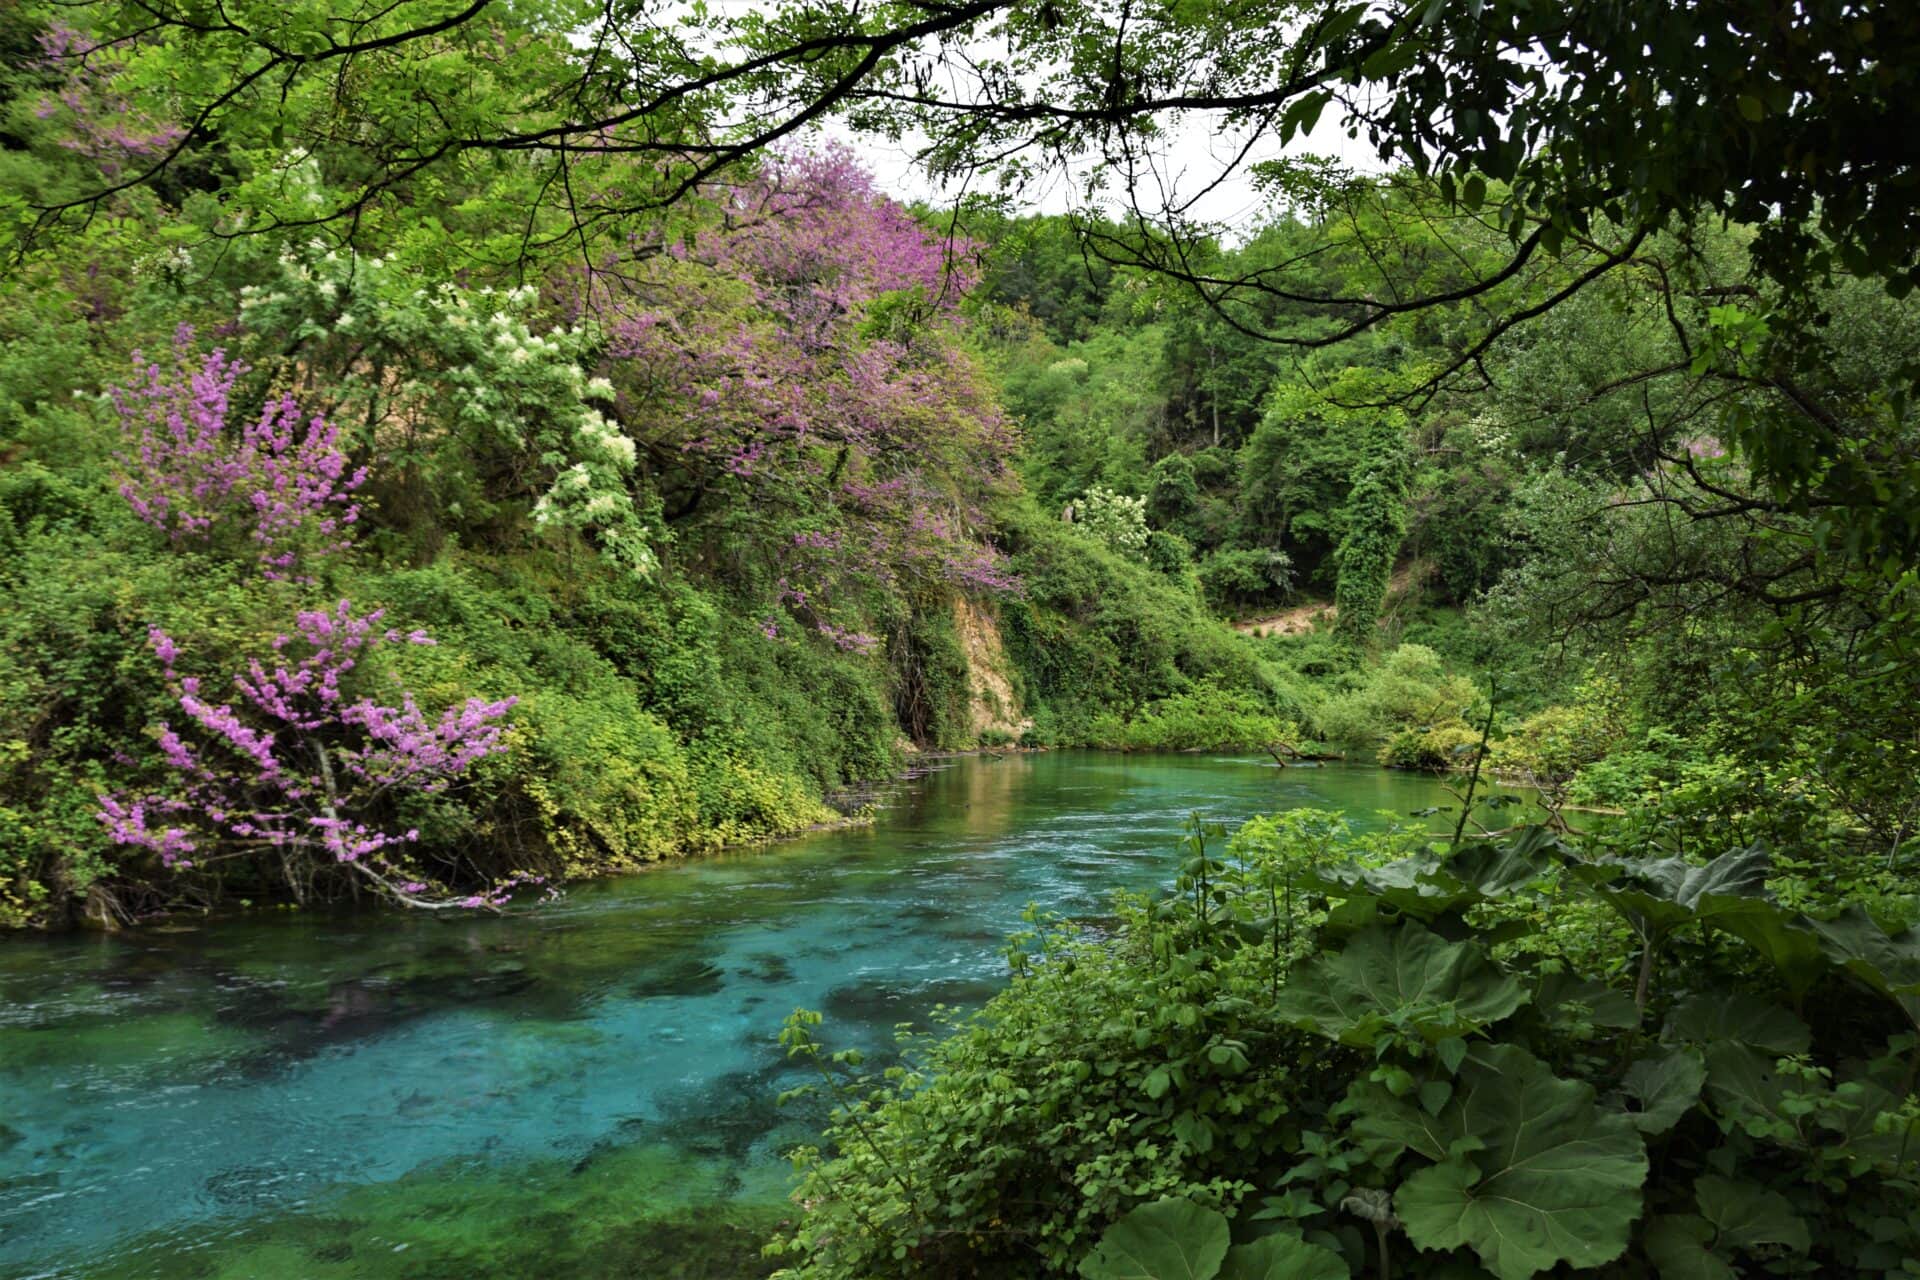 an incredibly translucent, turquoise river surrounded by lush vegetation and purple blossoms